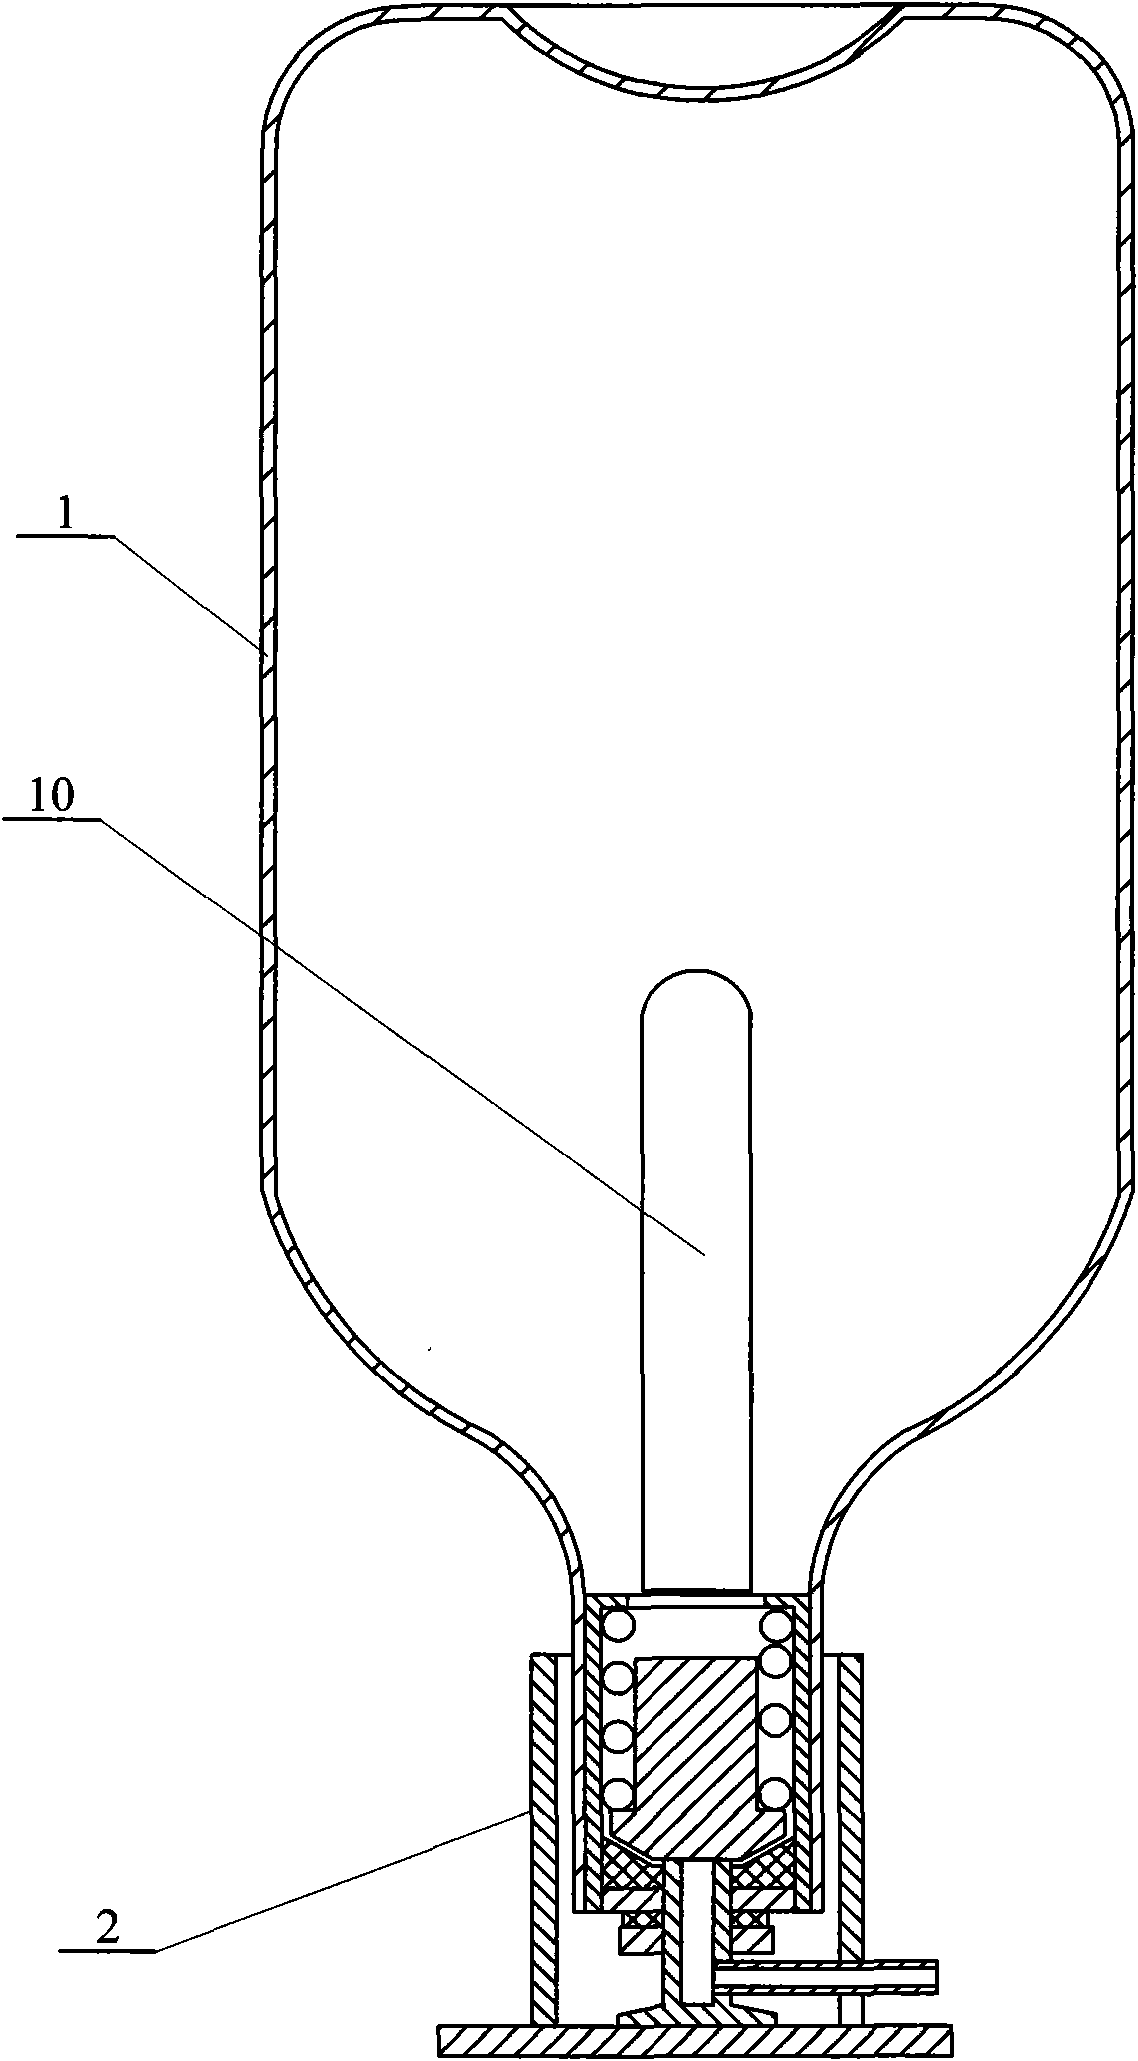 Pneumatic device for intravenous infusion